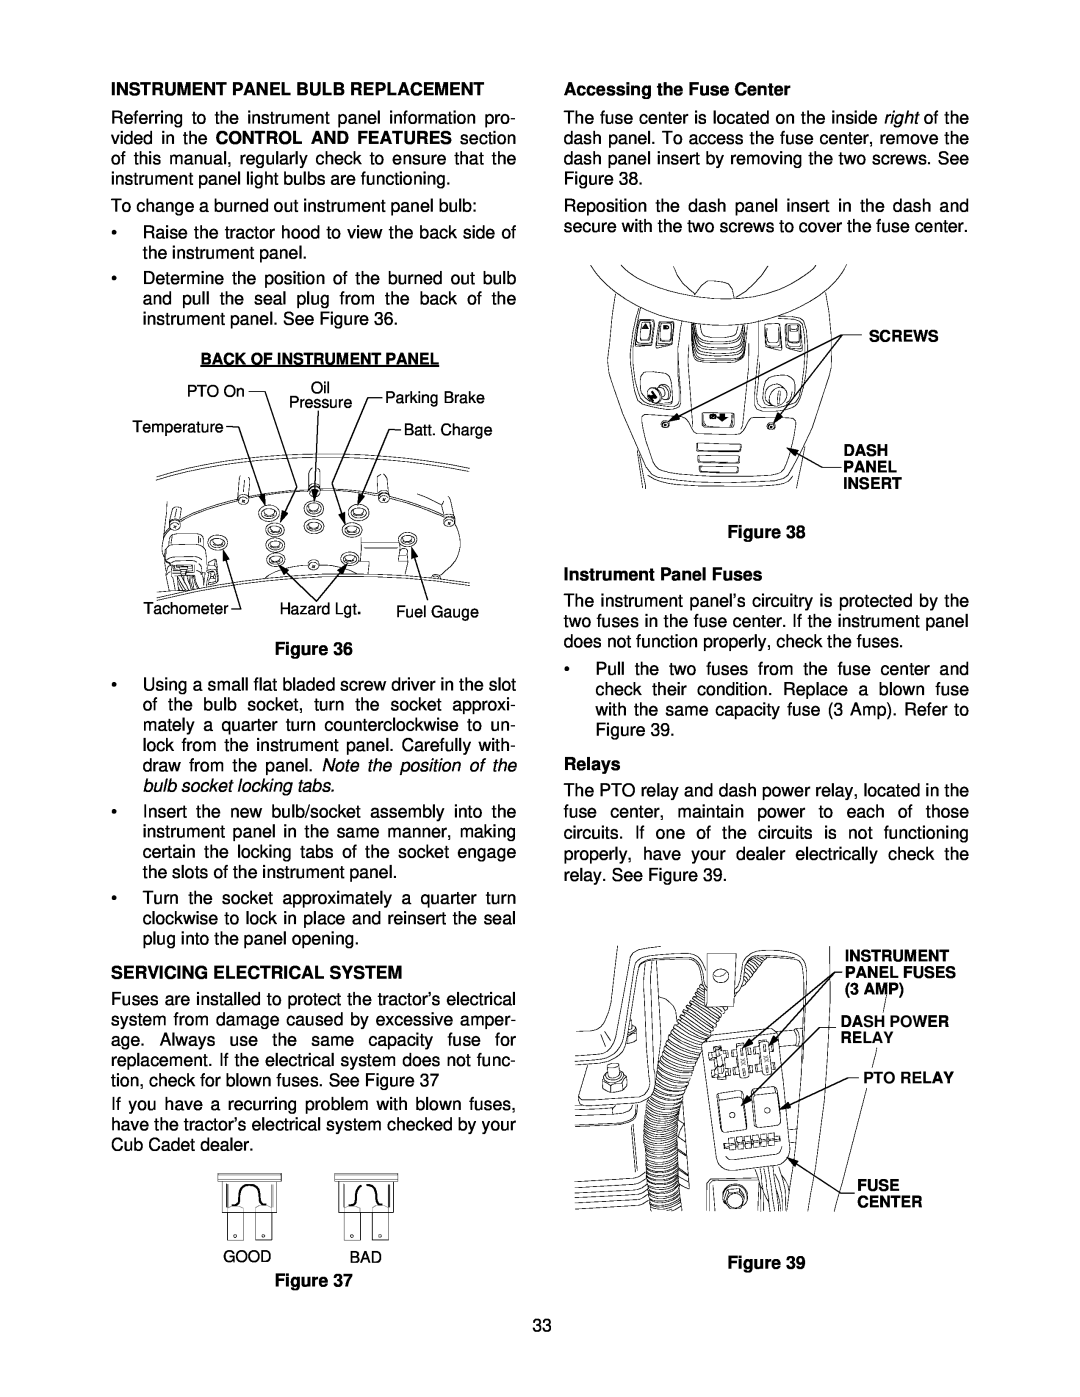 Cub Cadet 7264 manual Instrument Panel Bulb Replacement, Servicing Electrical System, Accessing the Fuse Center, Relays 